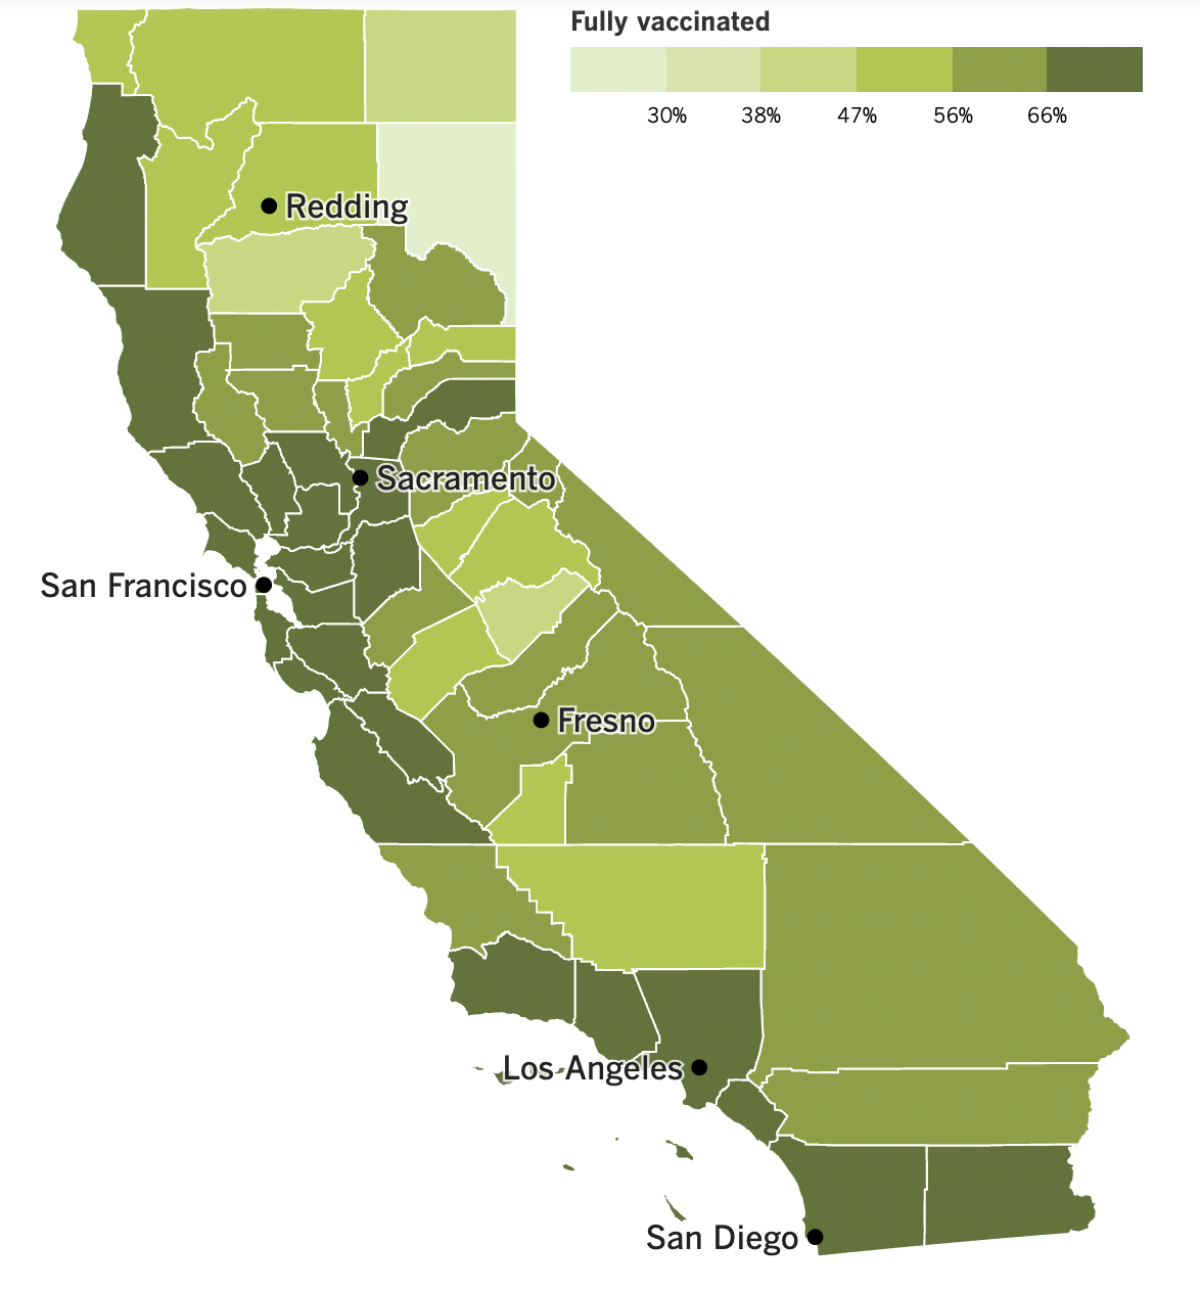 A map showing California's COVID-19 vaccination progress by county as of Sept. 27, 2022.